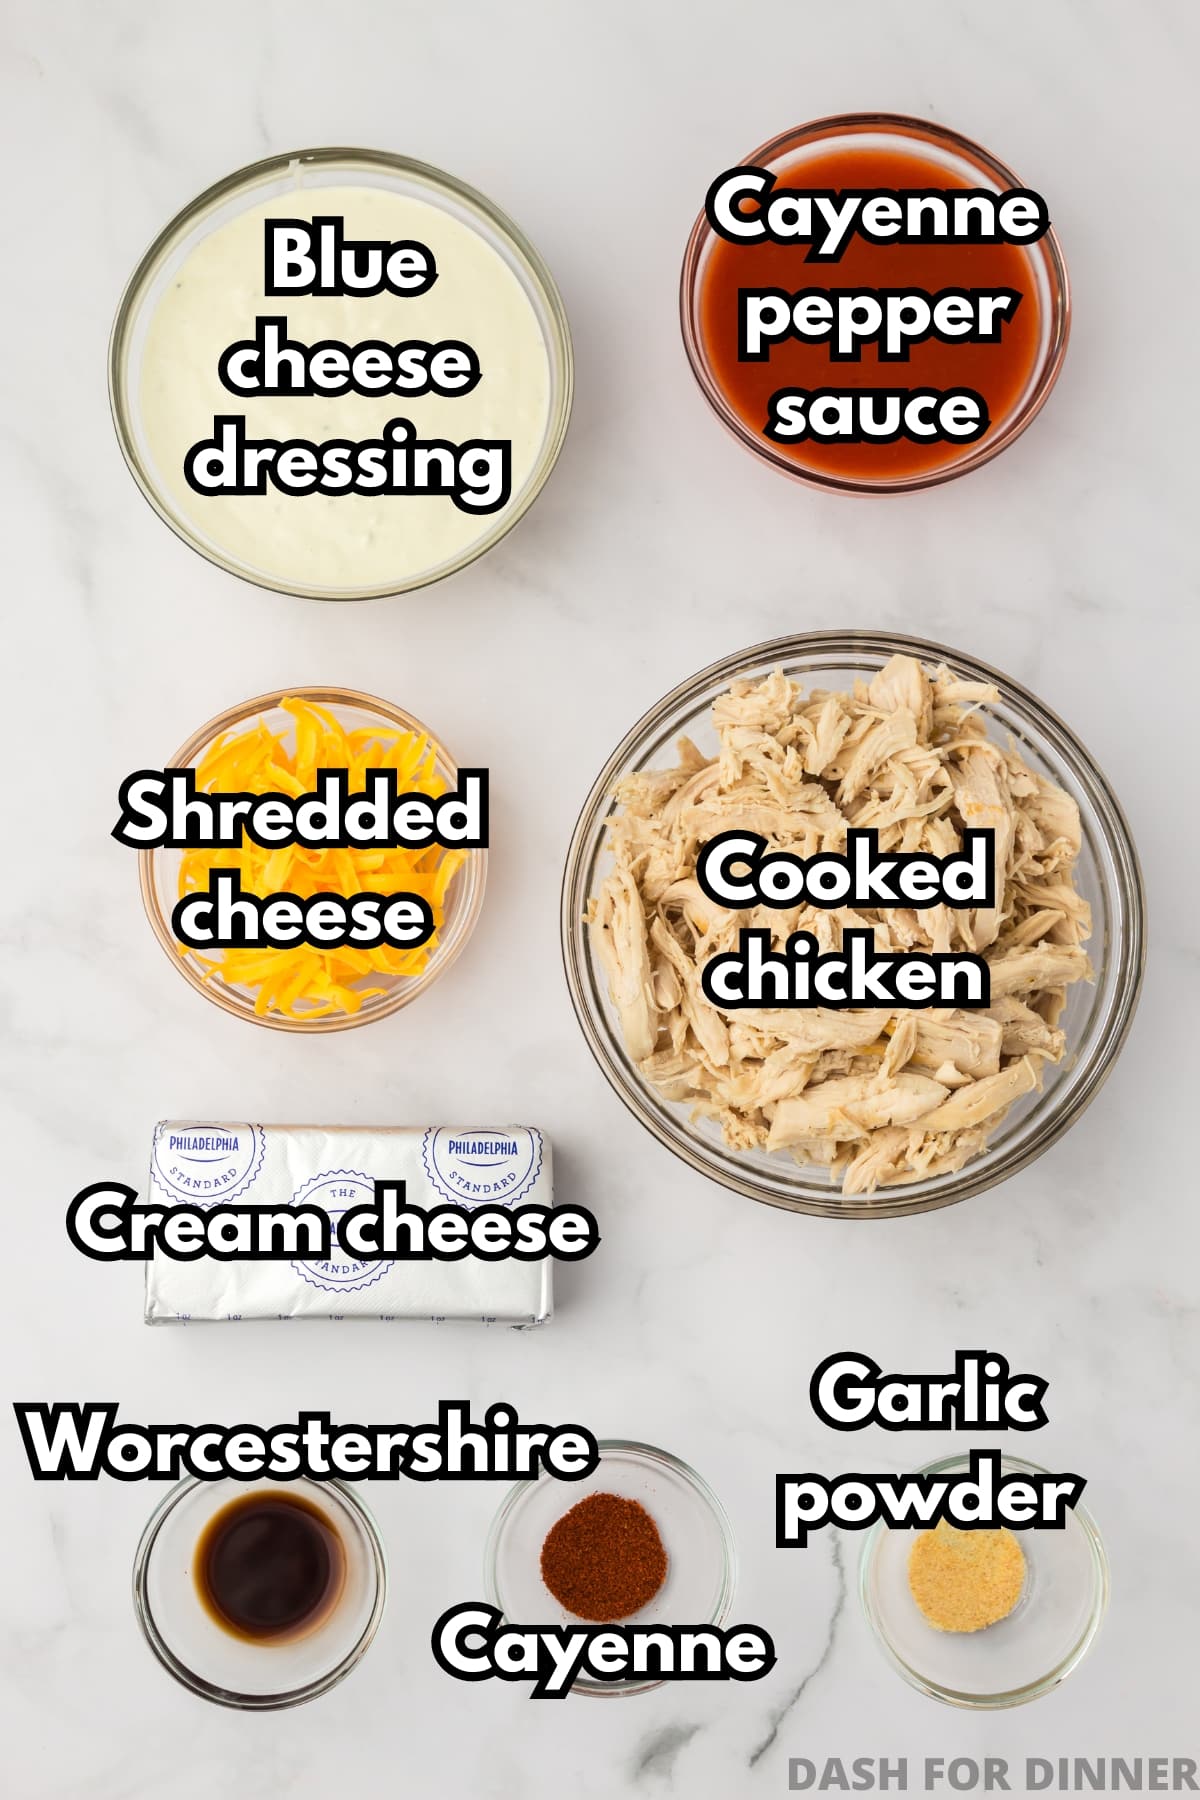 The ingredients needed to make buffalo chicken dip, including cayenne pepper sauce, blue cheese dressing, cream cheese, cheddar cheese, and cooked chicken.